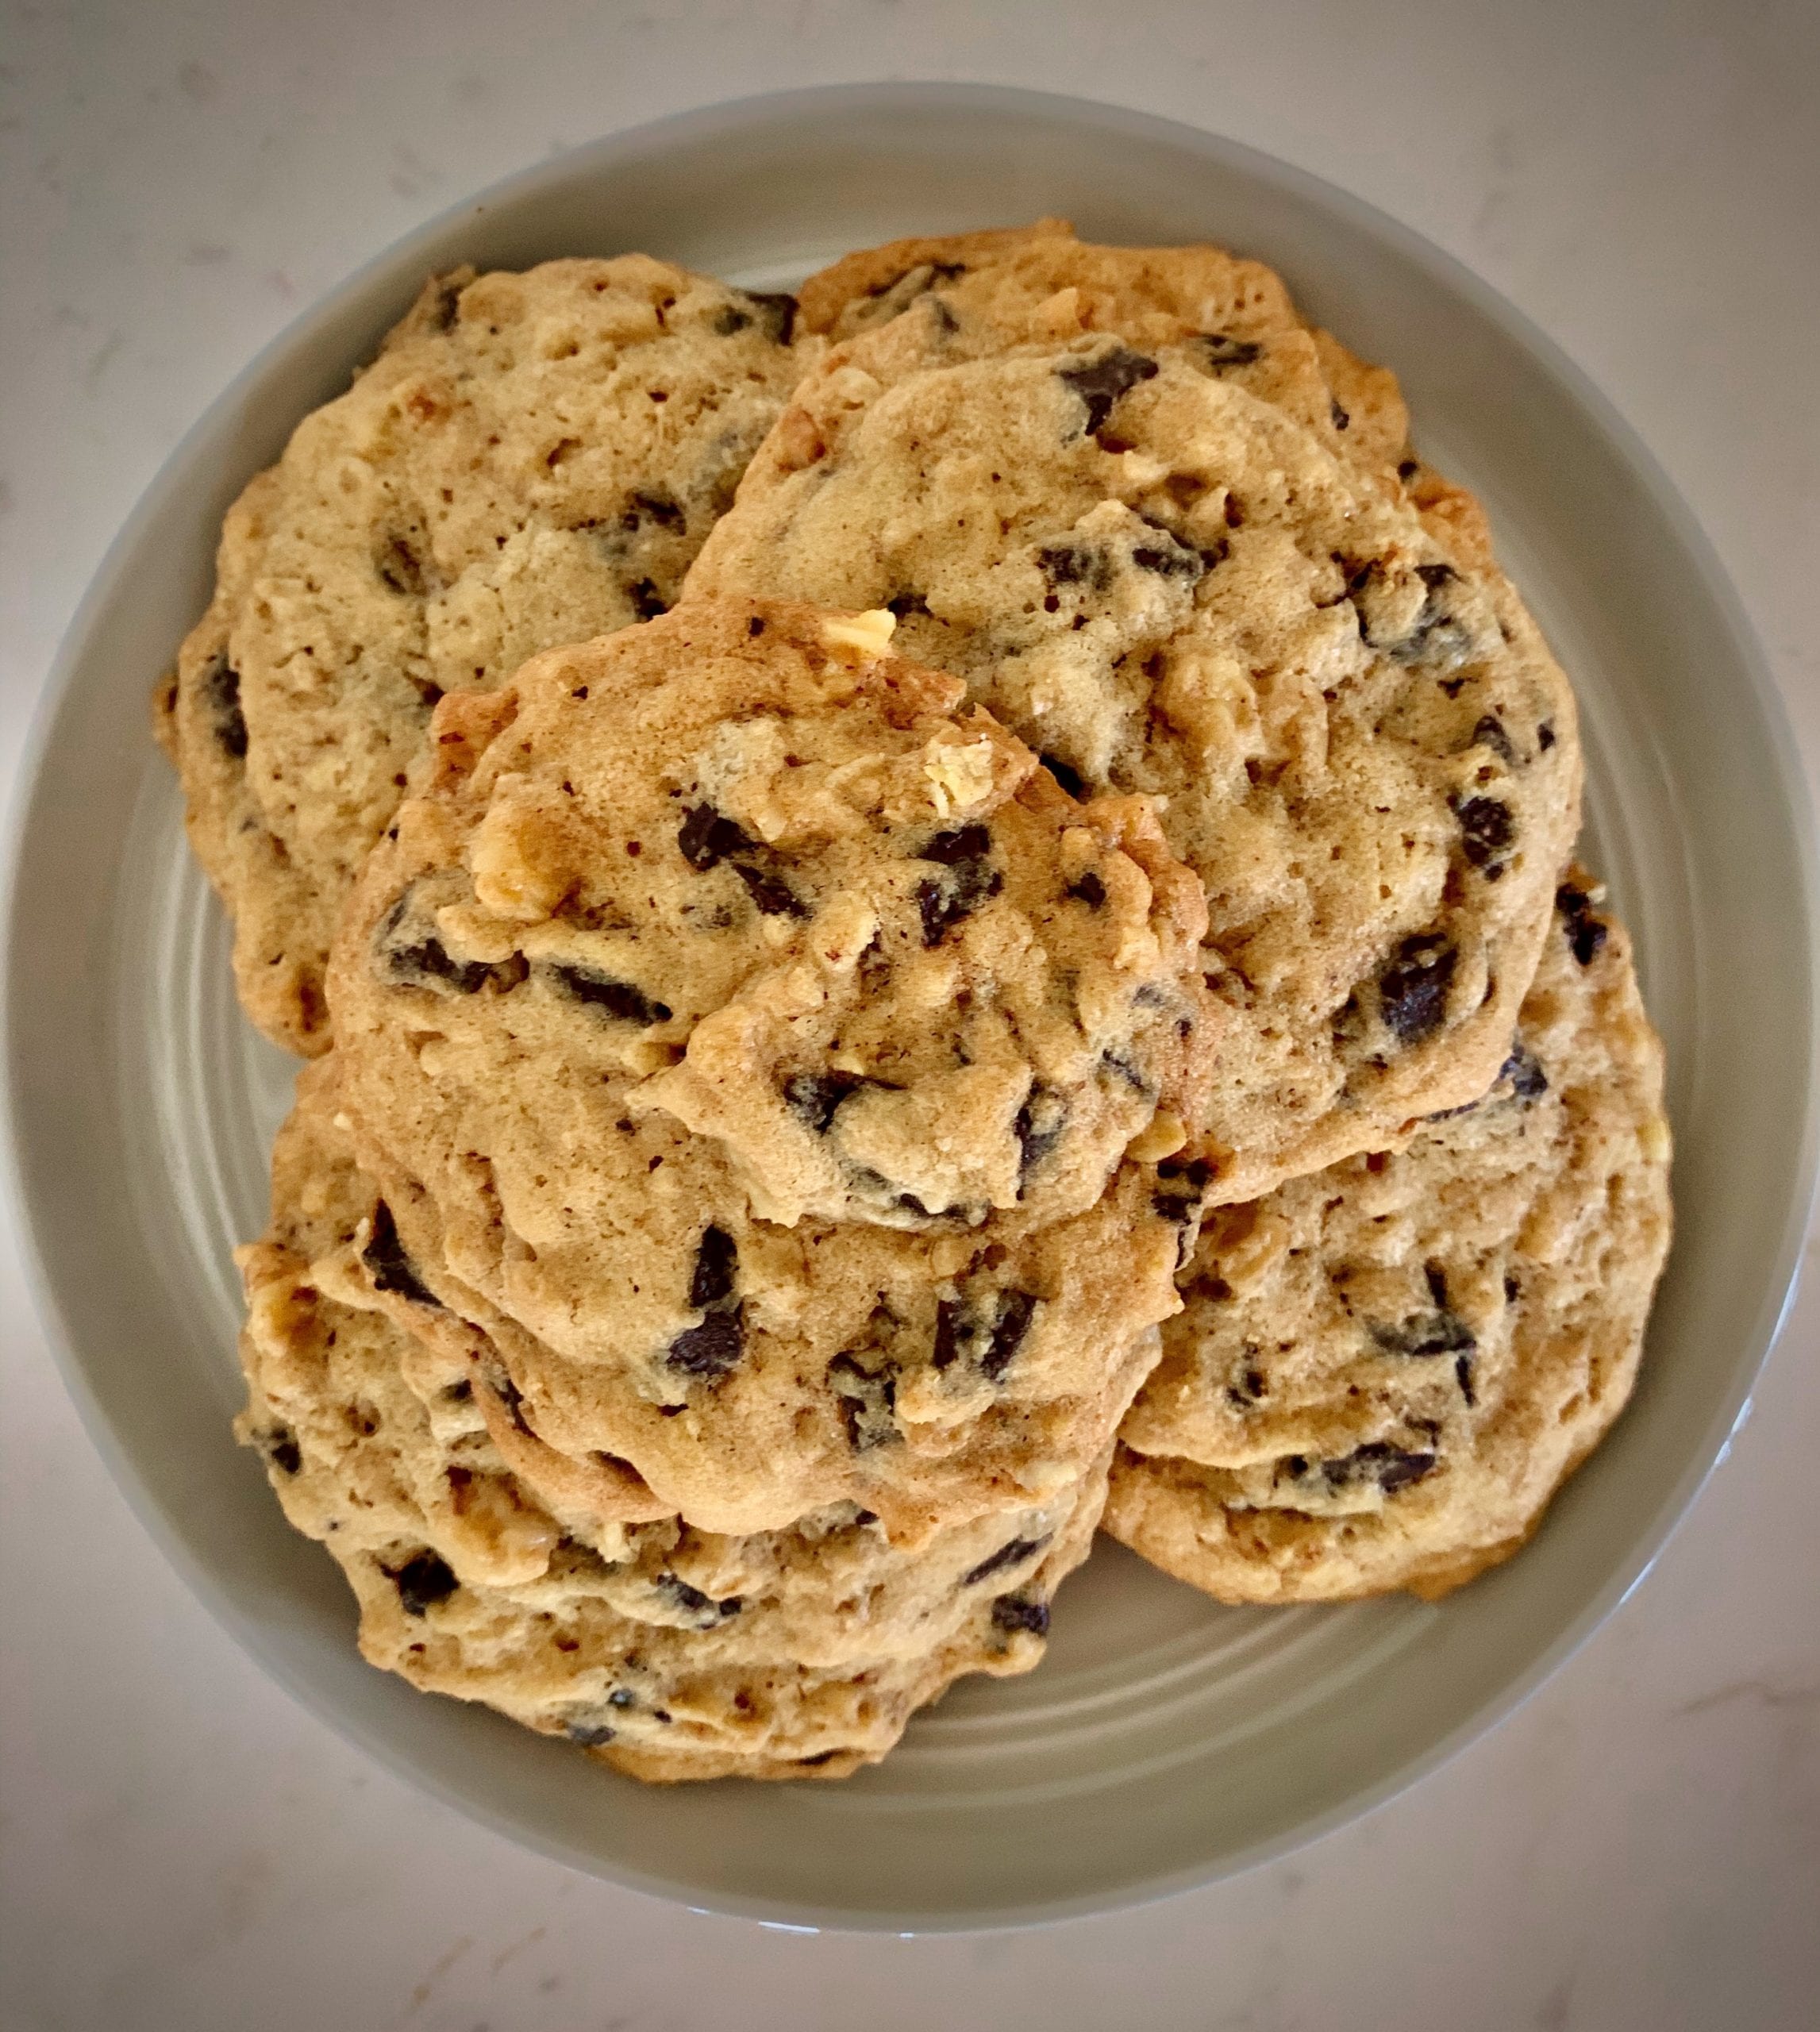 doubletree chocolate chip cookies, the best chocolate chip cookies recipe, easy chocolate chip cookies recipe